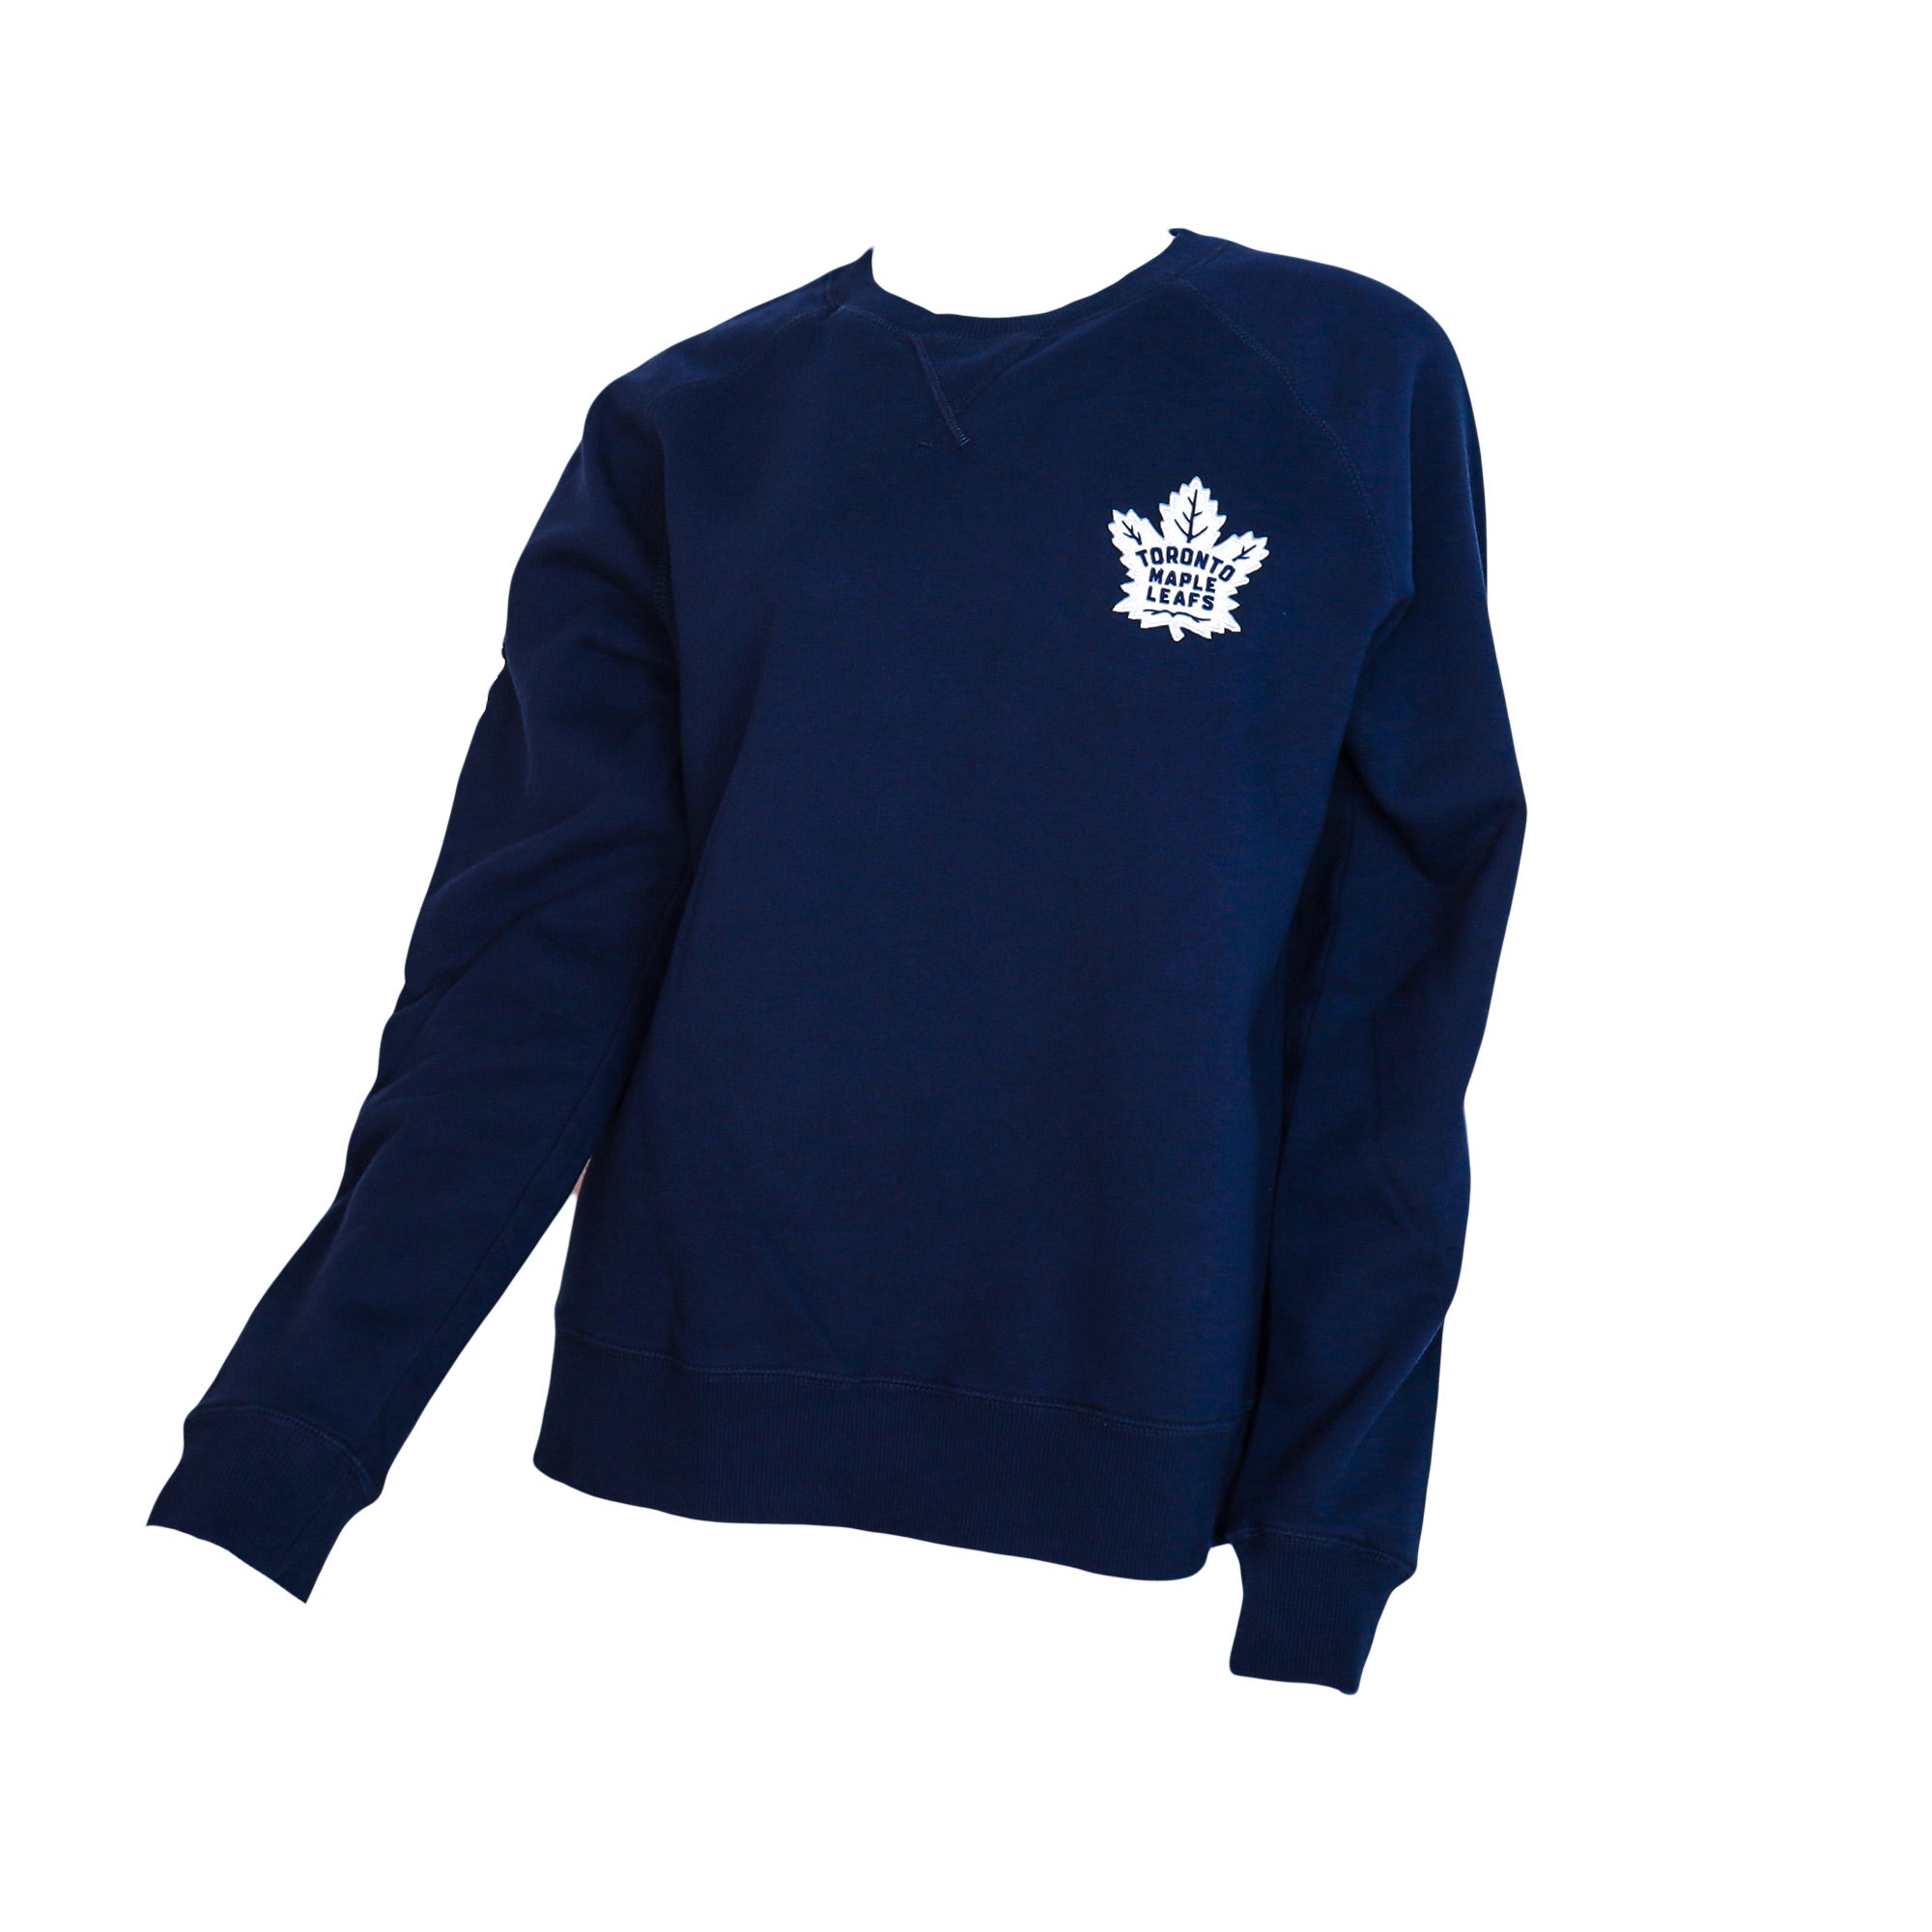 Toronto Maple Leafs on X: A return to our roots. Be one of the